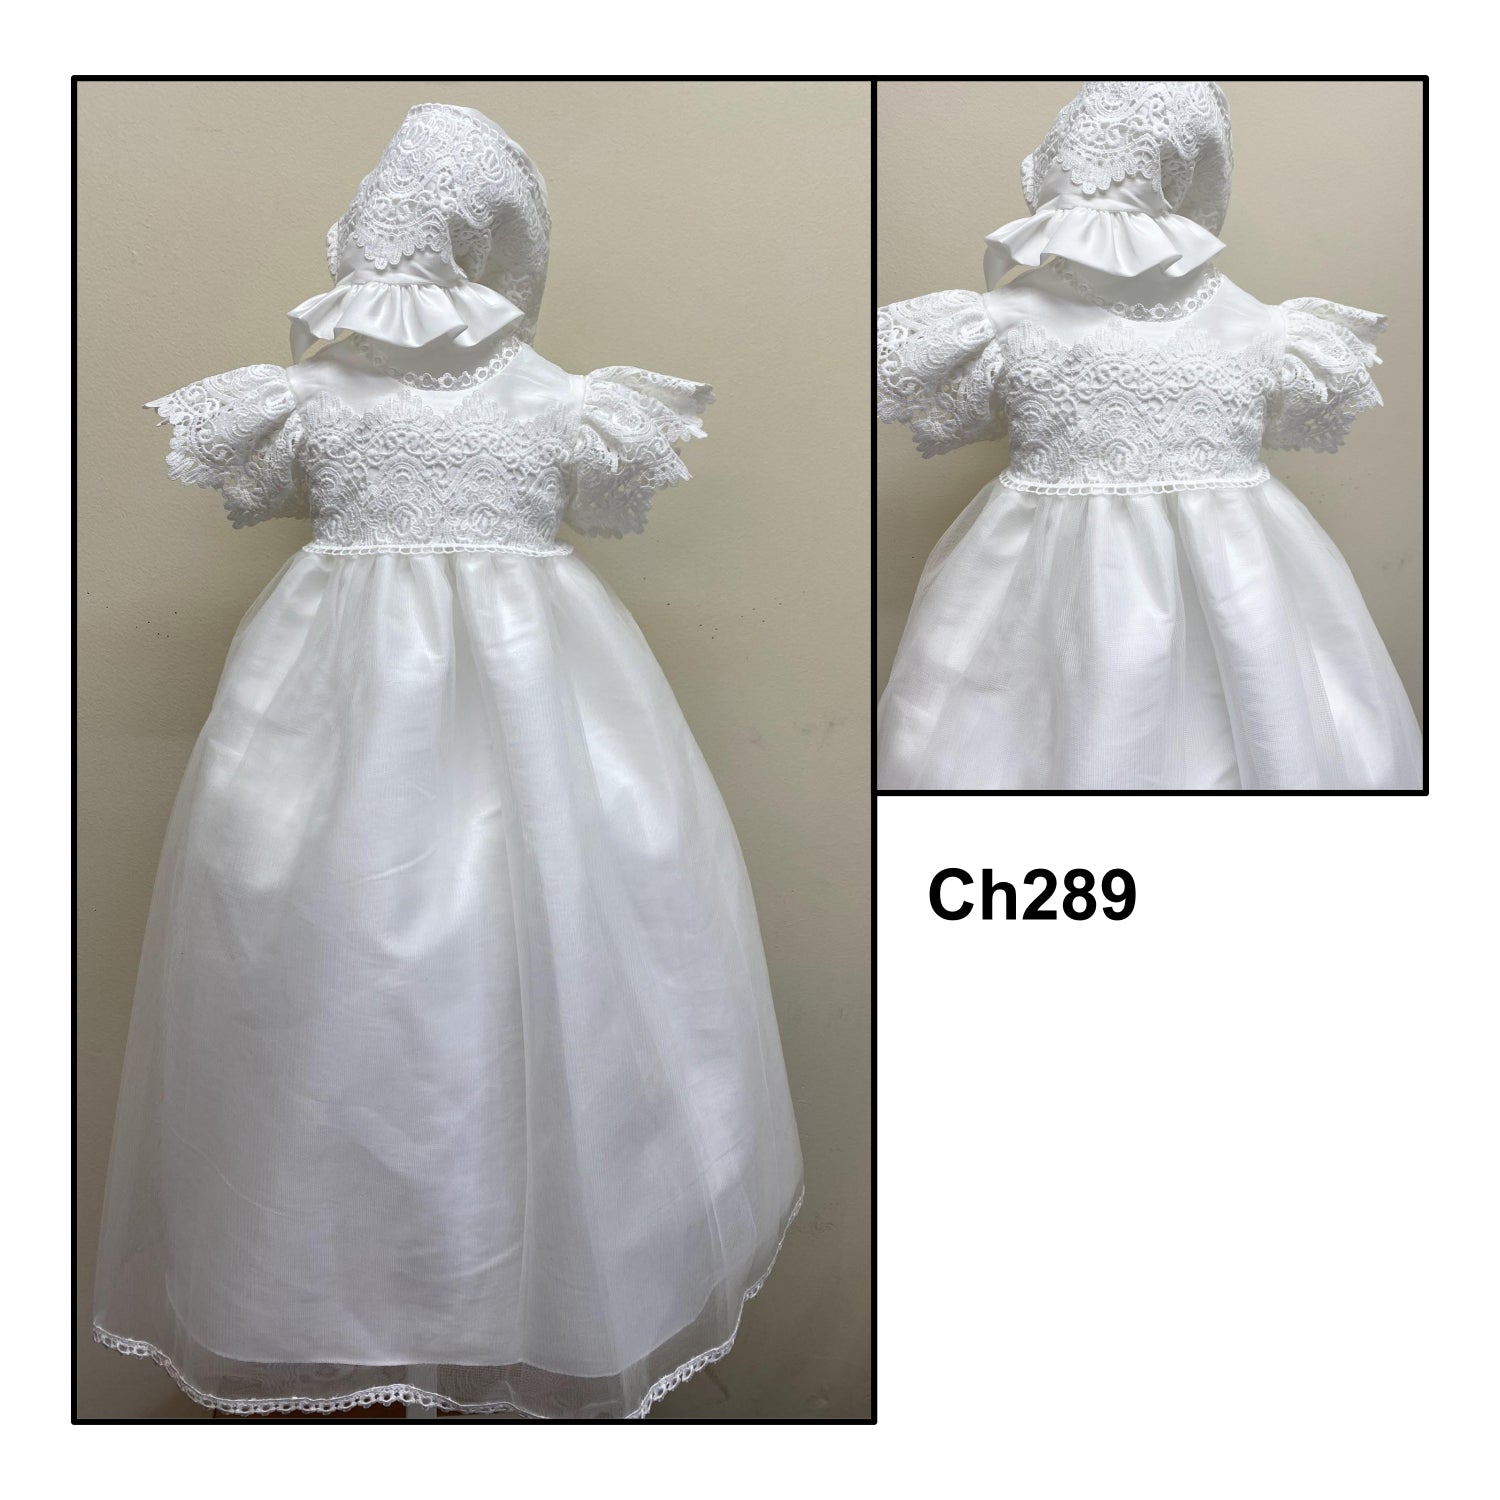 Embroidered Organza and Tulle Crochet Lace Christening Gown with Bonnet in Ivory